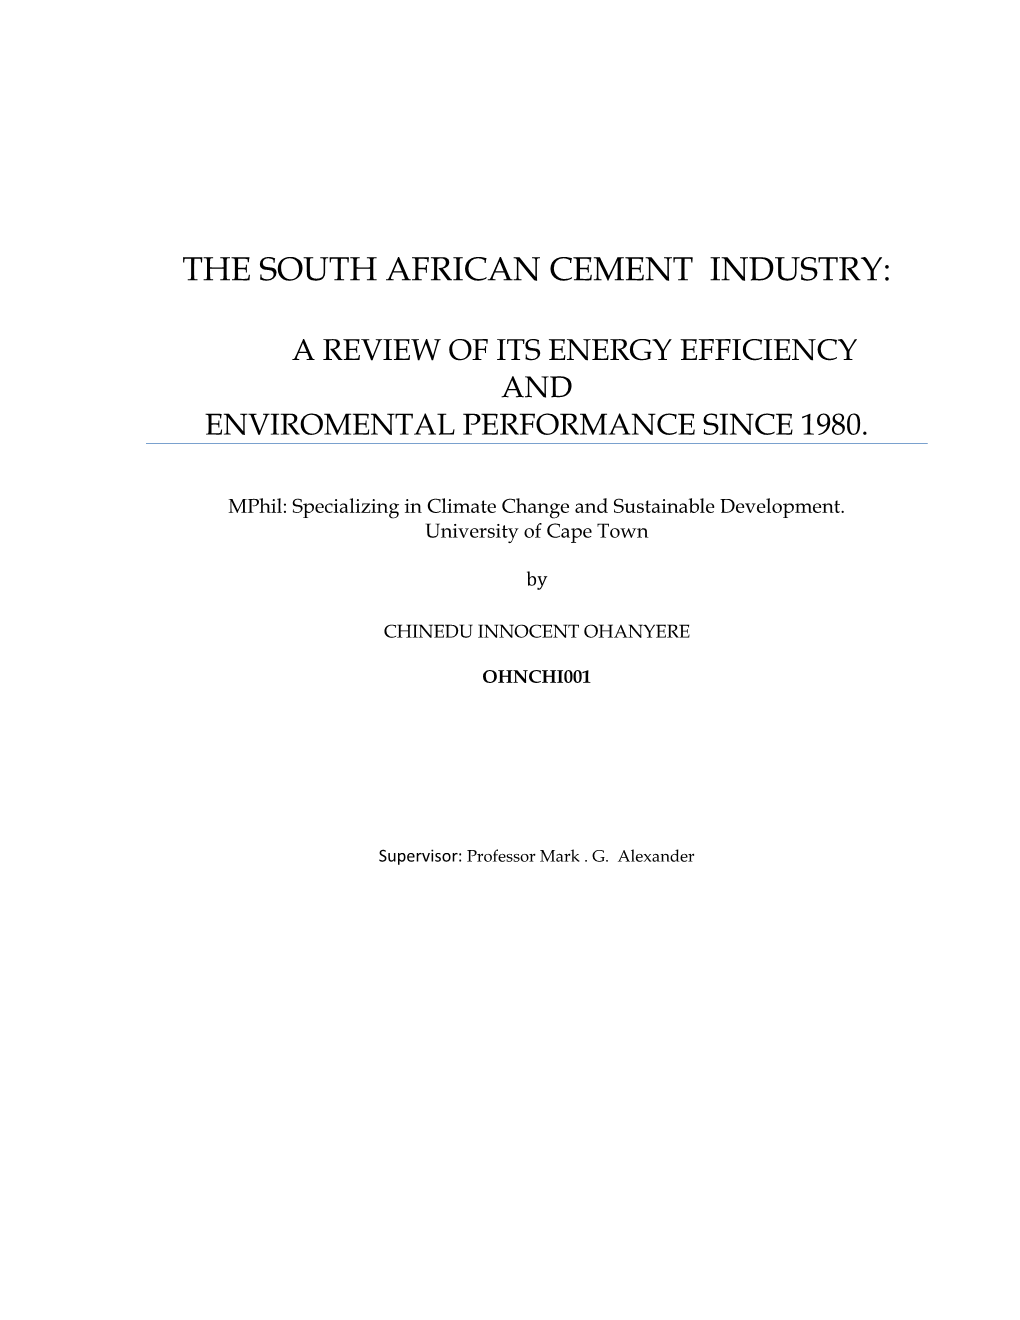 The South African Cement Industry: a Review of Its